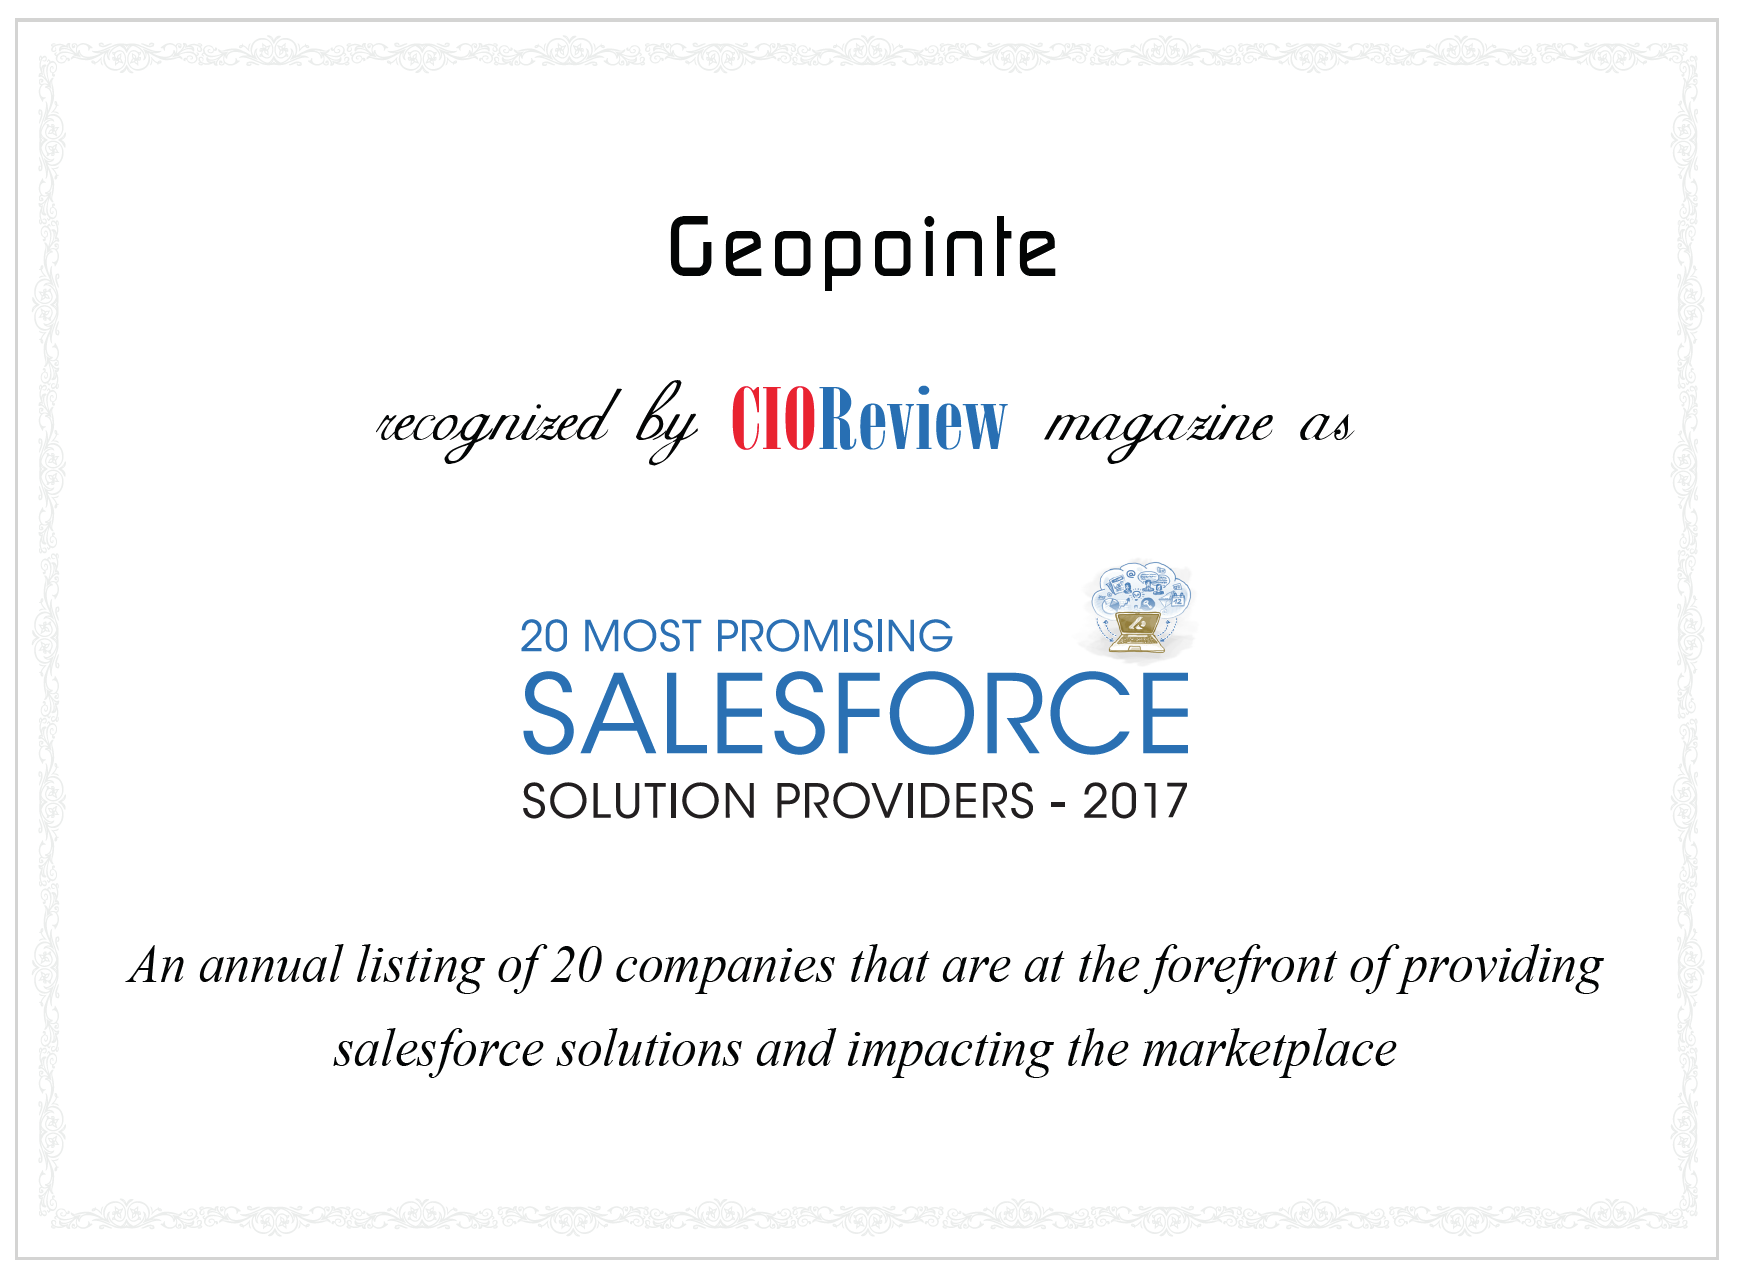 Geopointe Named a Top 20 Most Promising Salesforce Solution Provider by CIOReview